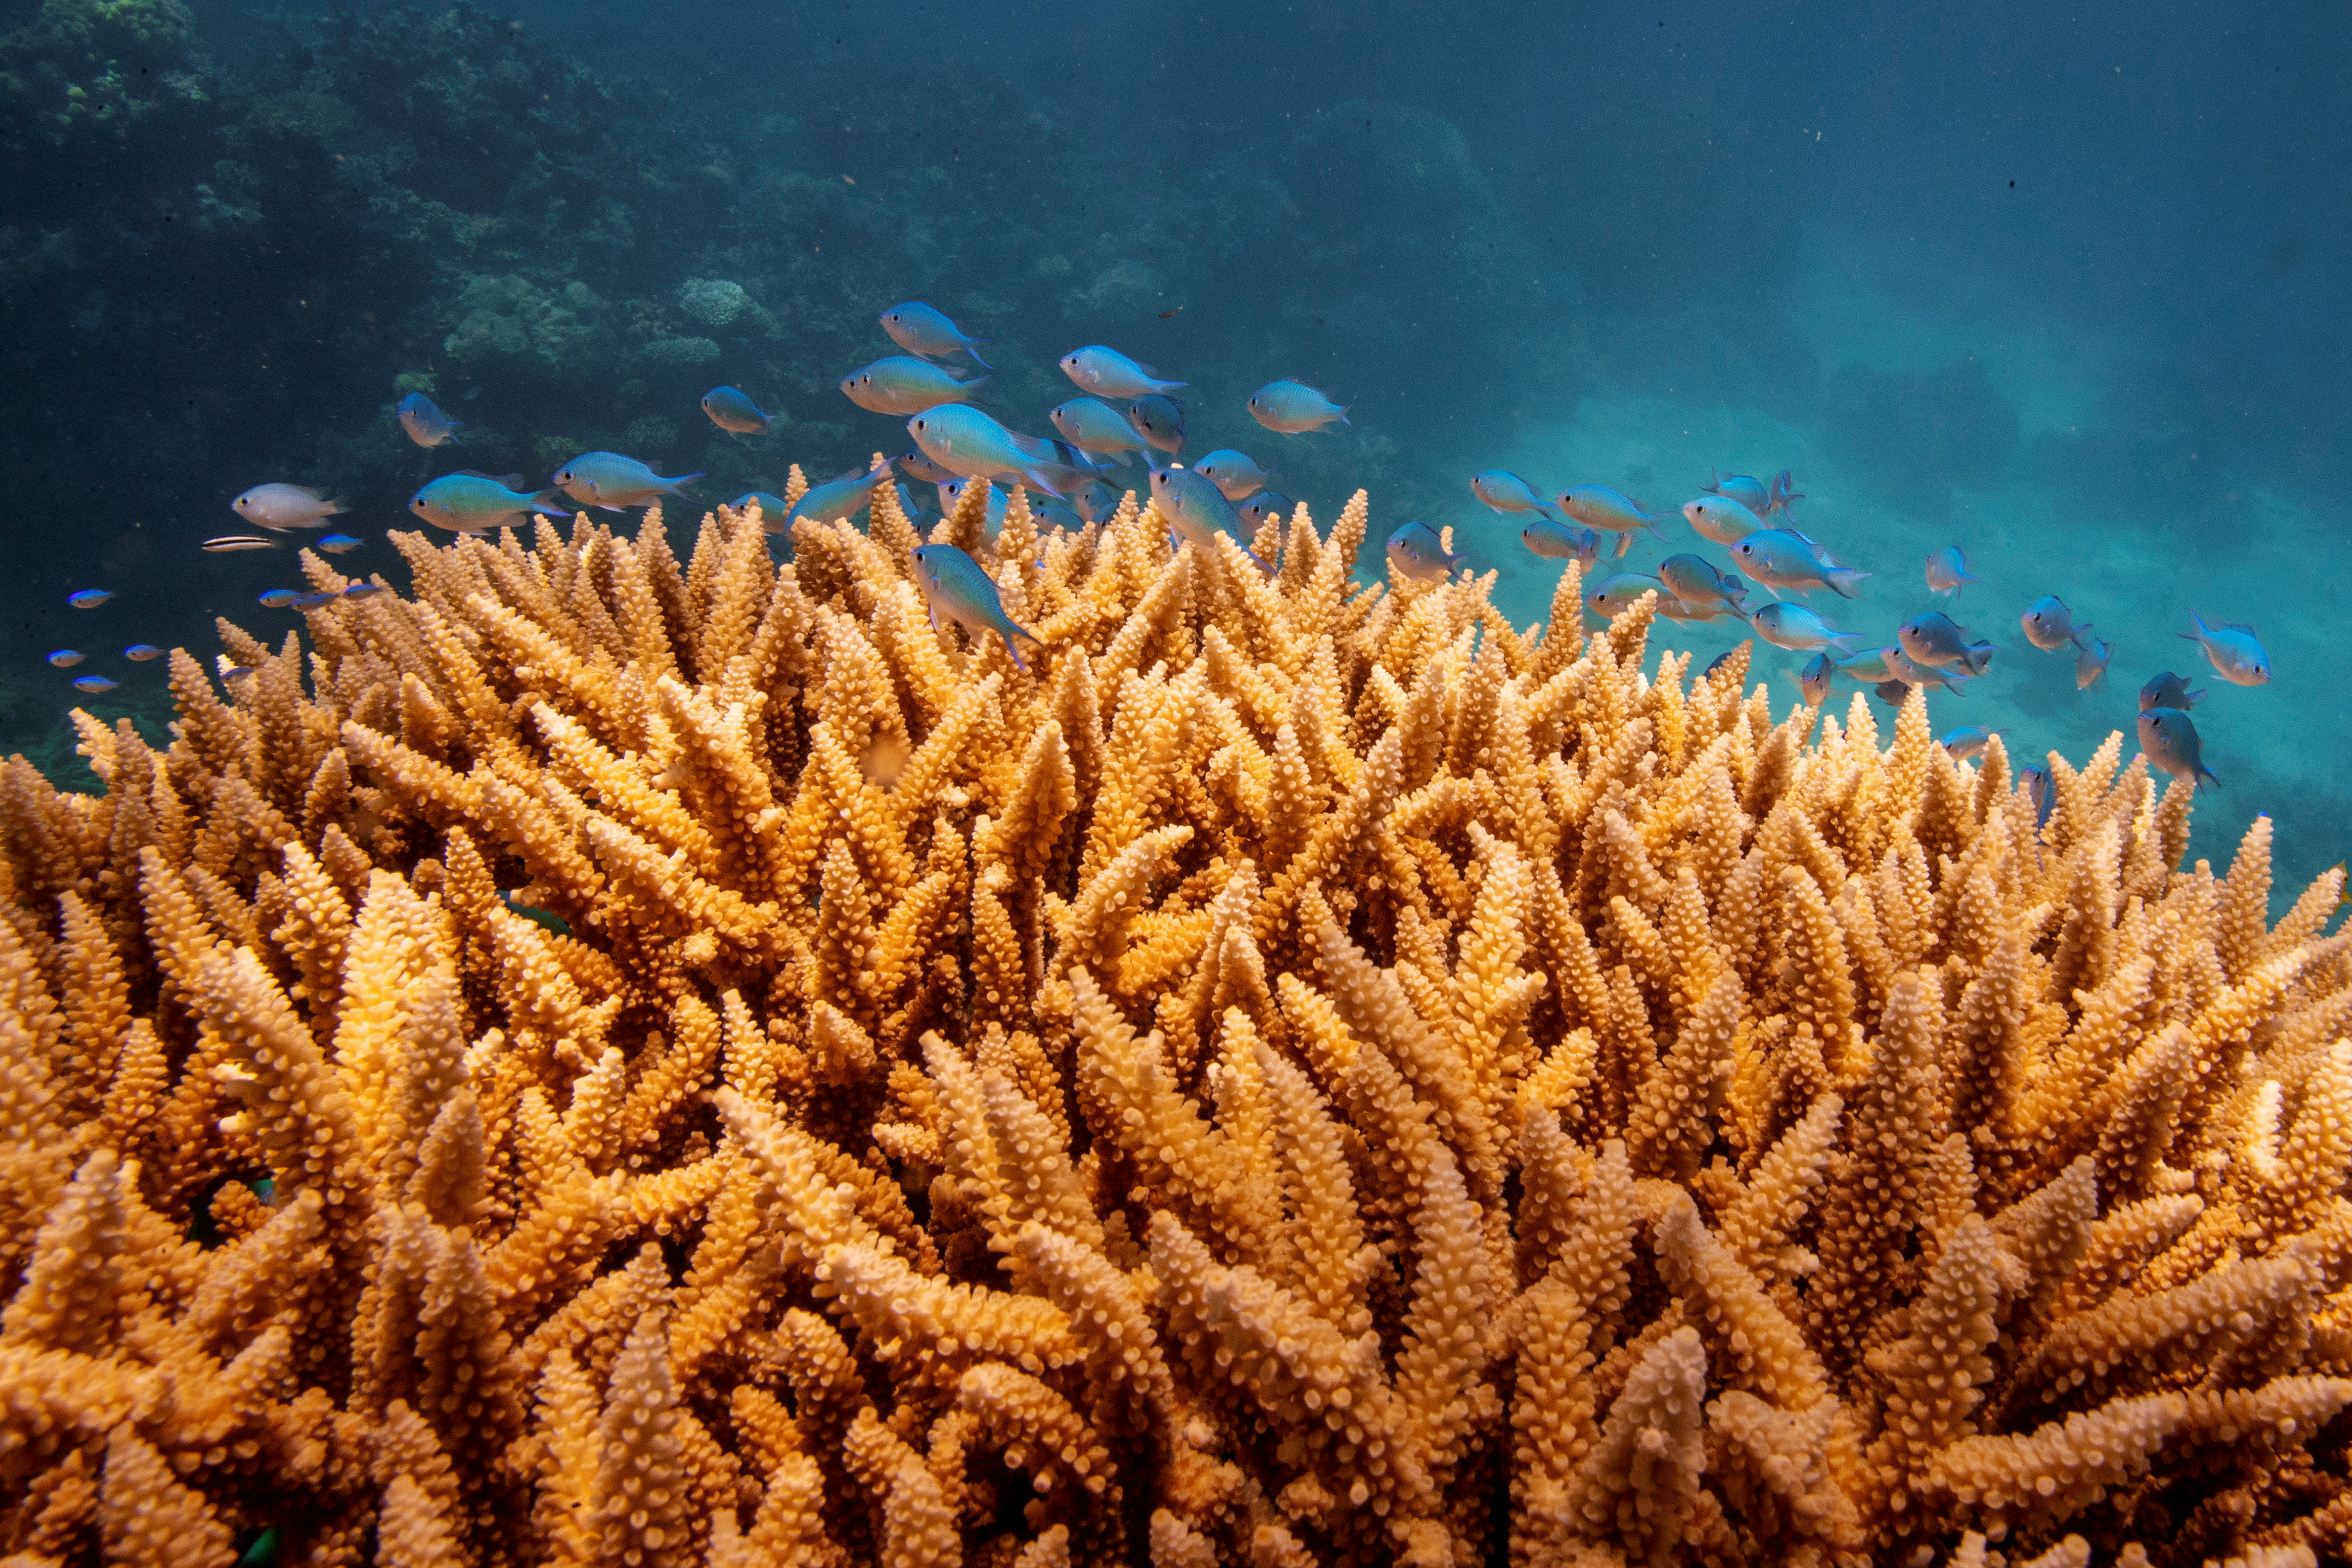 A school of fish swim above a staghorn (Acropora cervicornis) coral colony as it grows on the Great Barrier Reef off the coast of Cairns, Australia